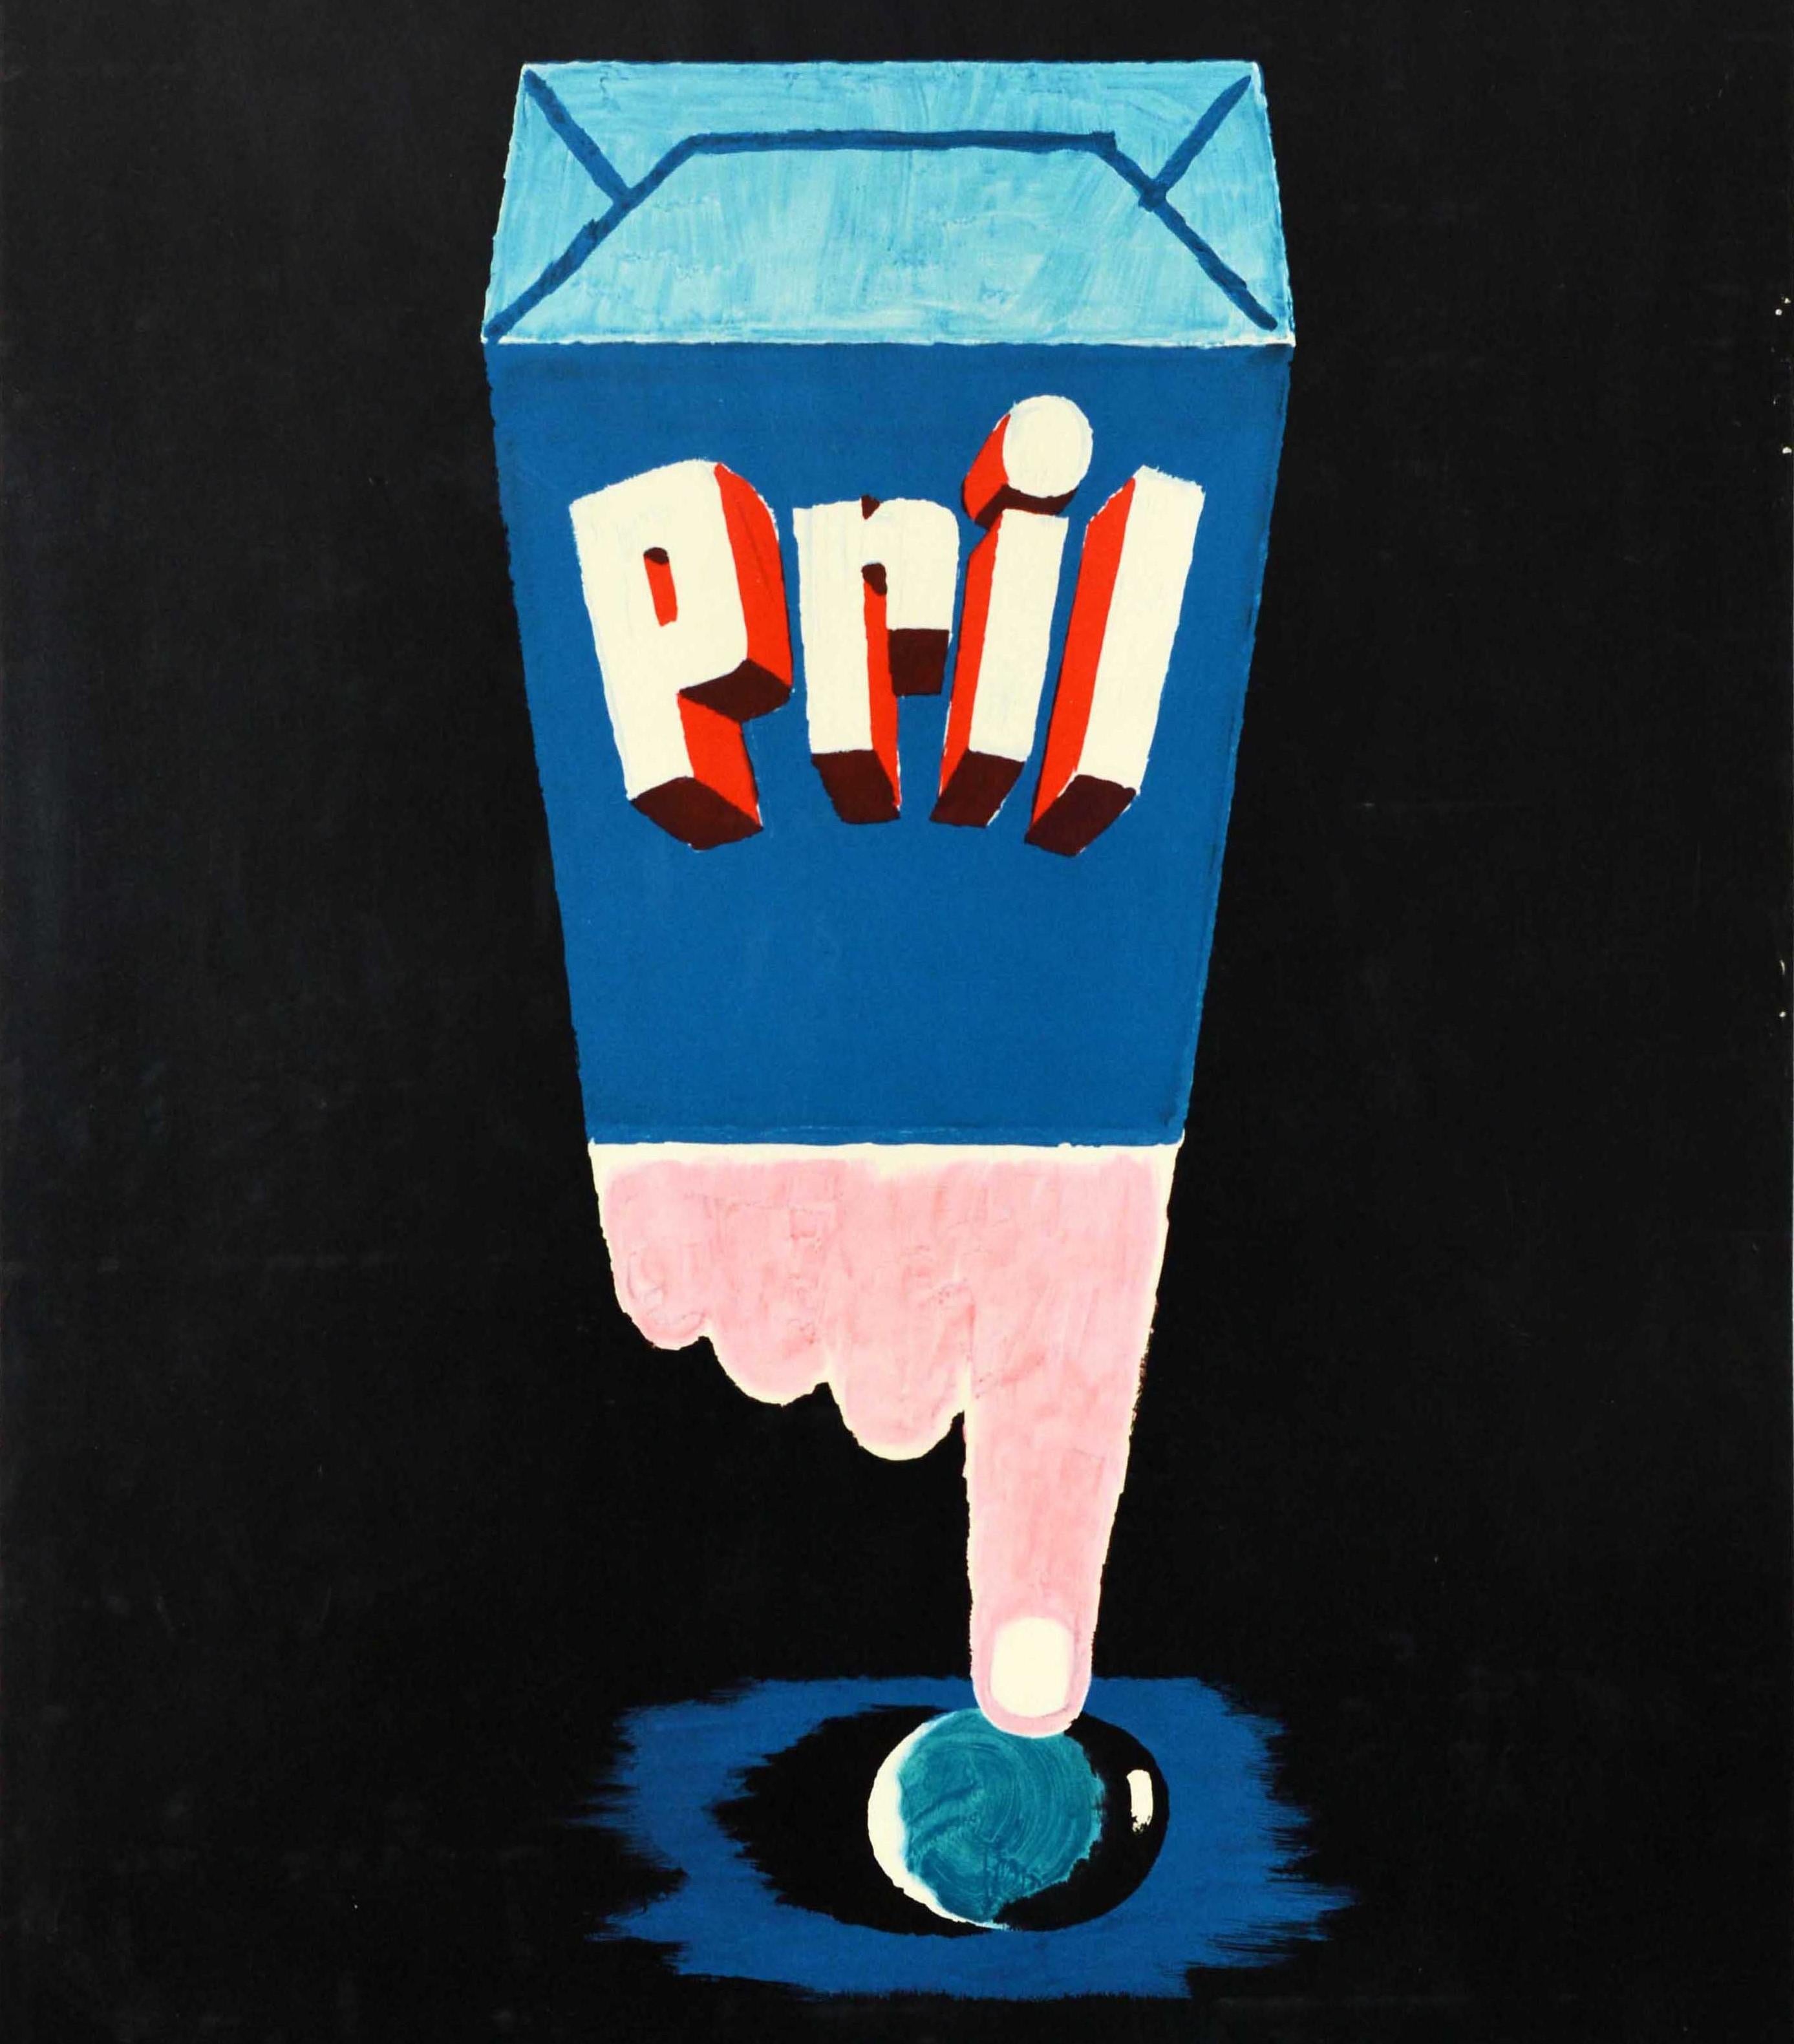 Original Vintage Advertising Poster For Pril Washing Up Powder Relaxes The Water In Good Condition For Sale In London, GB